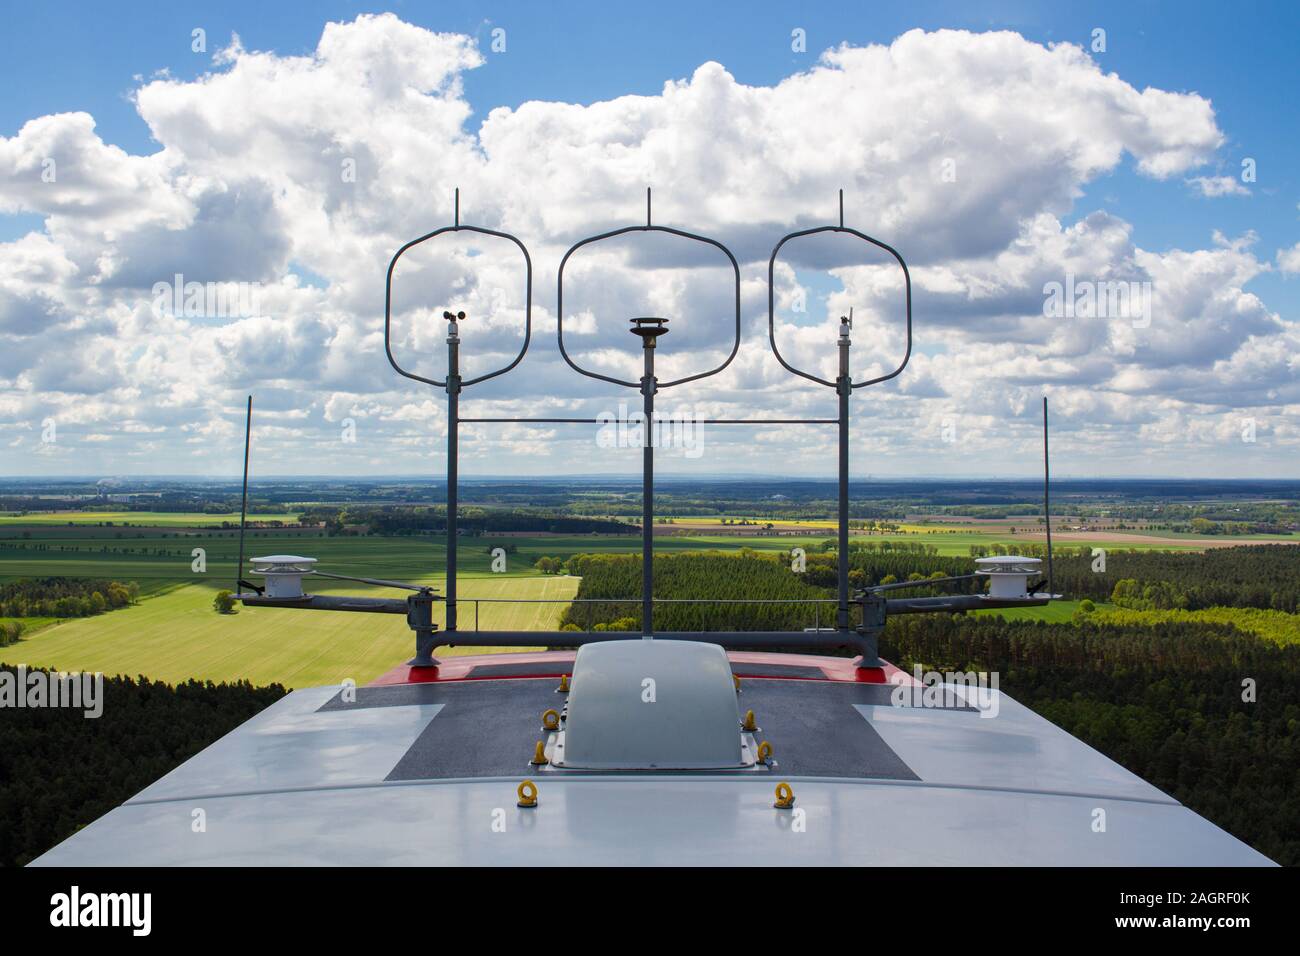 Measurement devices (cup anemometer, ultrasonic anemometer, wind vane) and aviation lights on the nacelle roof of a wind turbine with fields and cloud Stock Photo